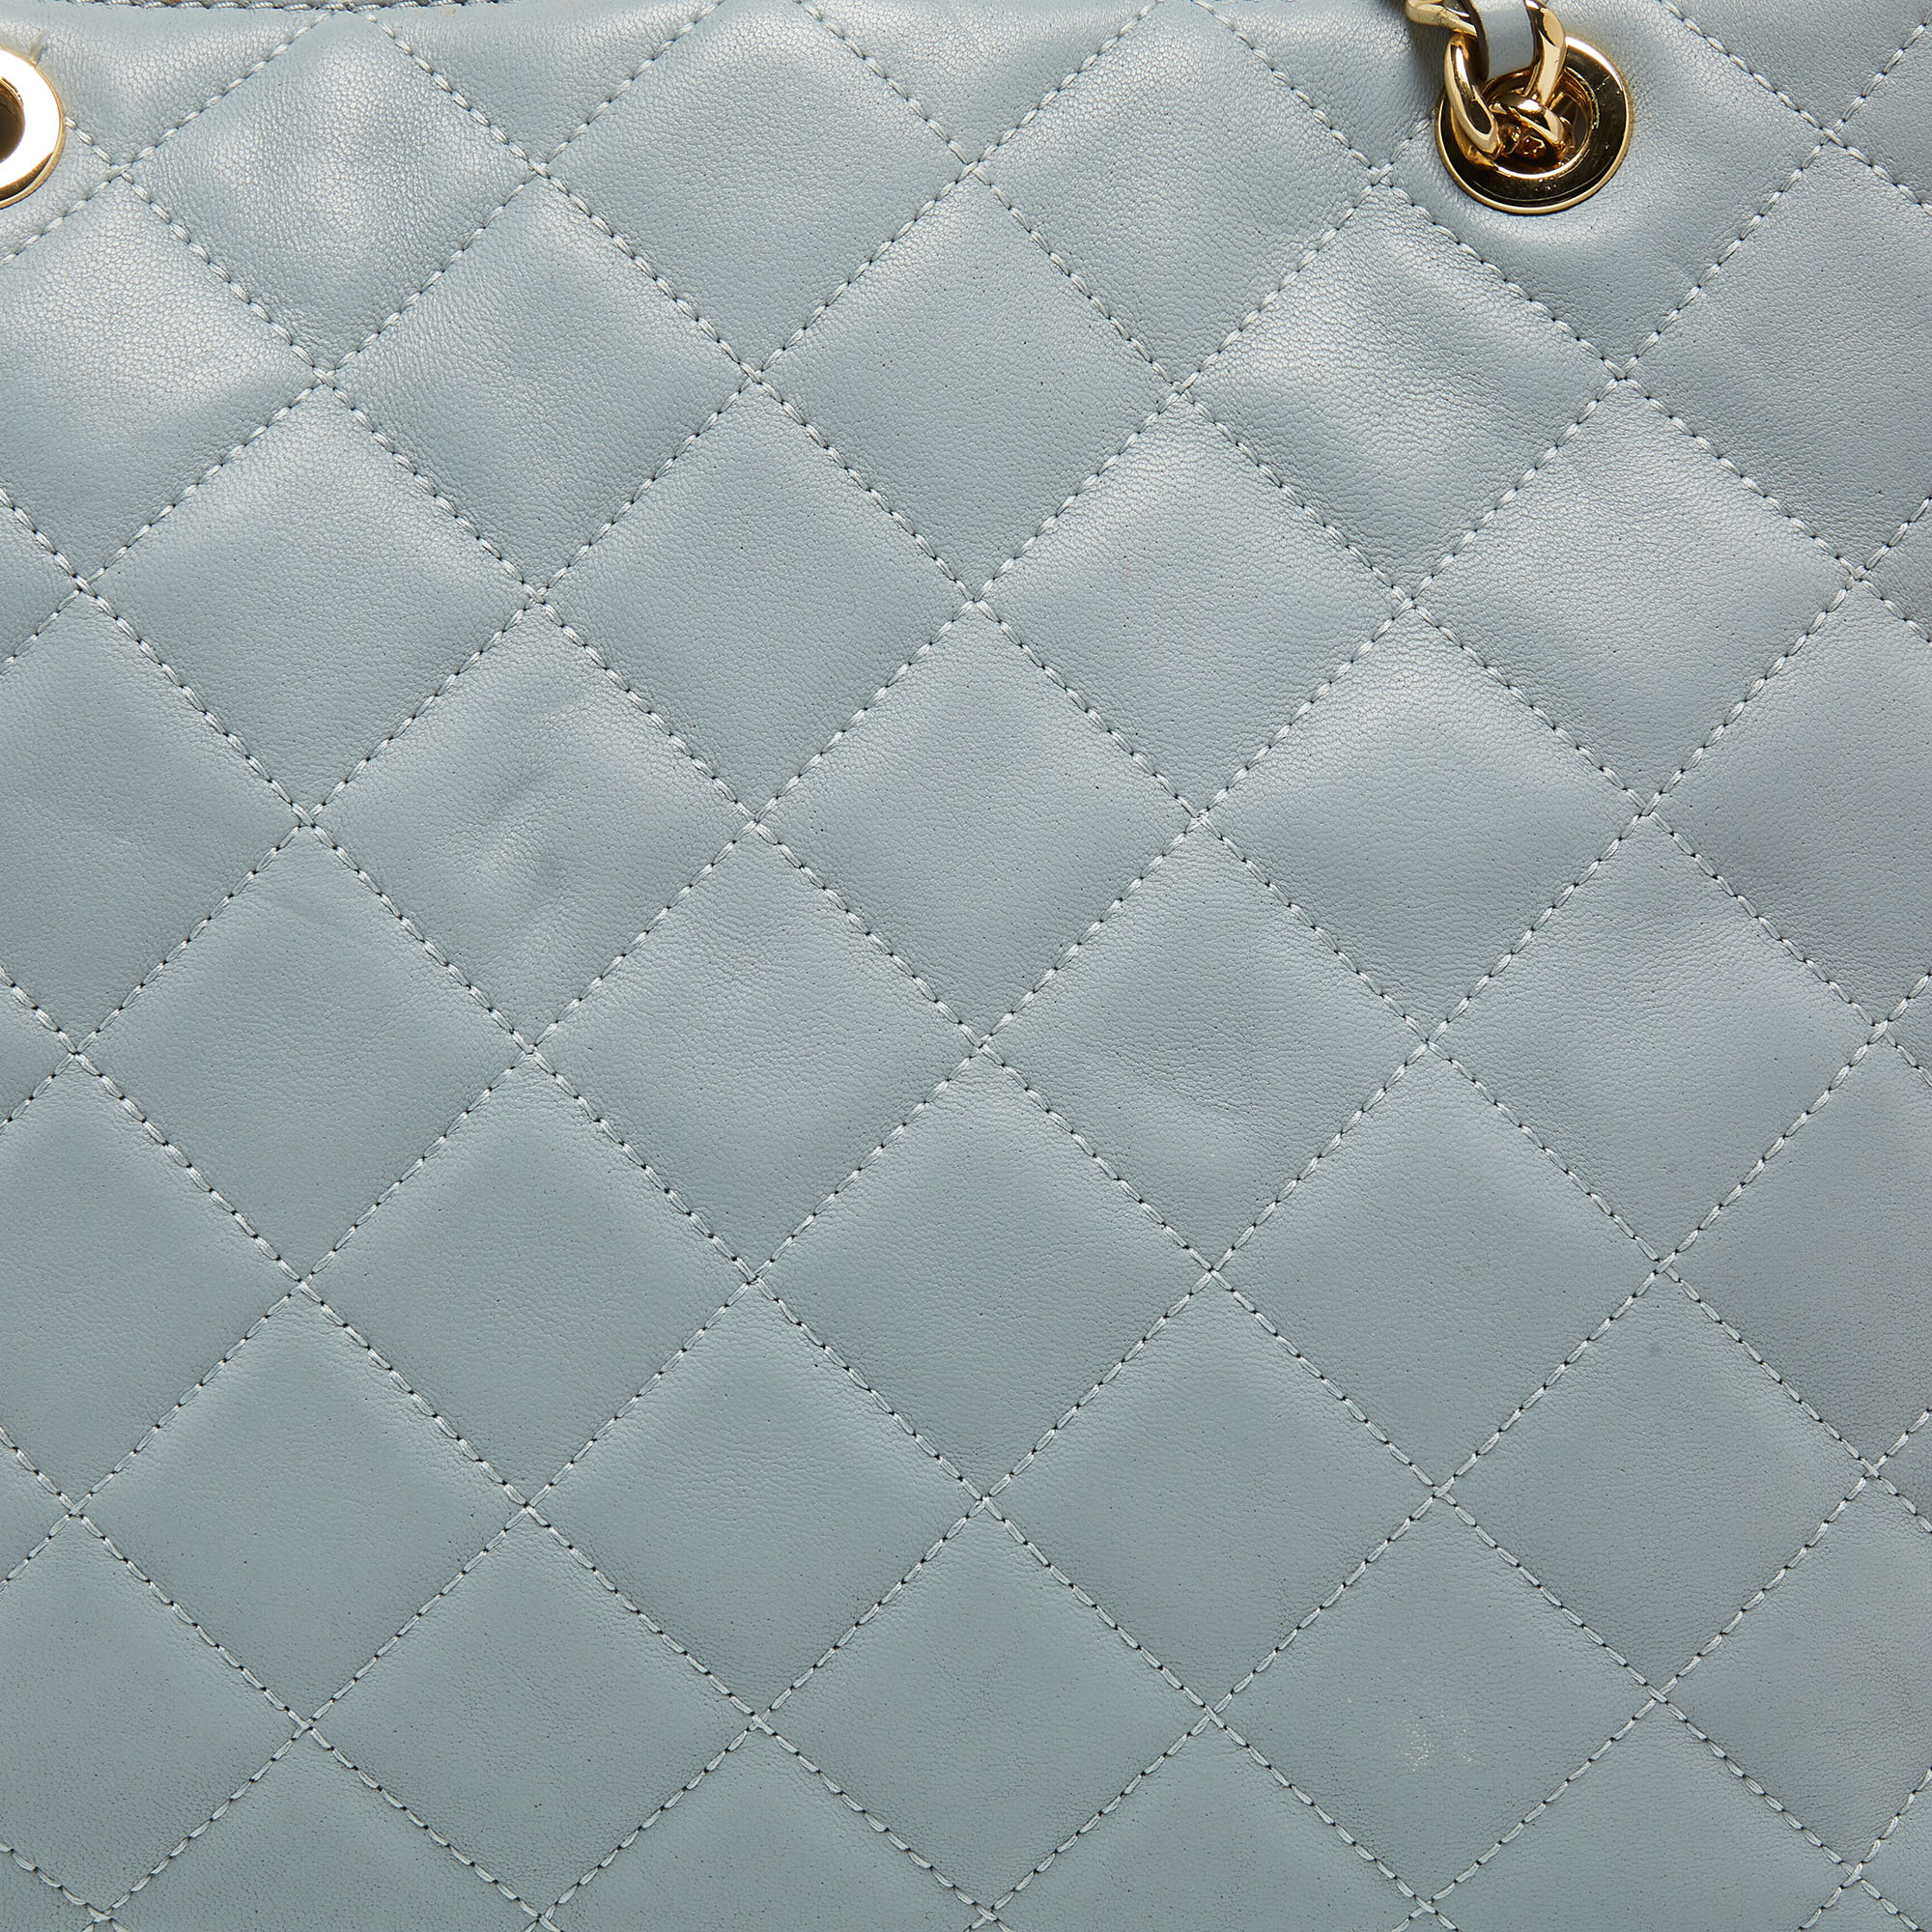 MICHAEL Michael Kors Light Blue Quilted Leather Susannah Tote